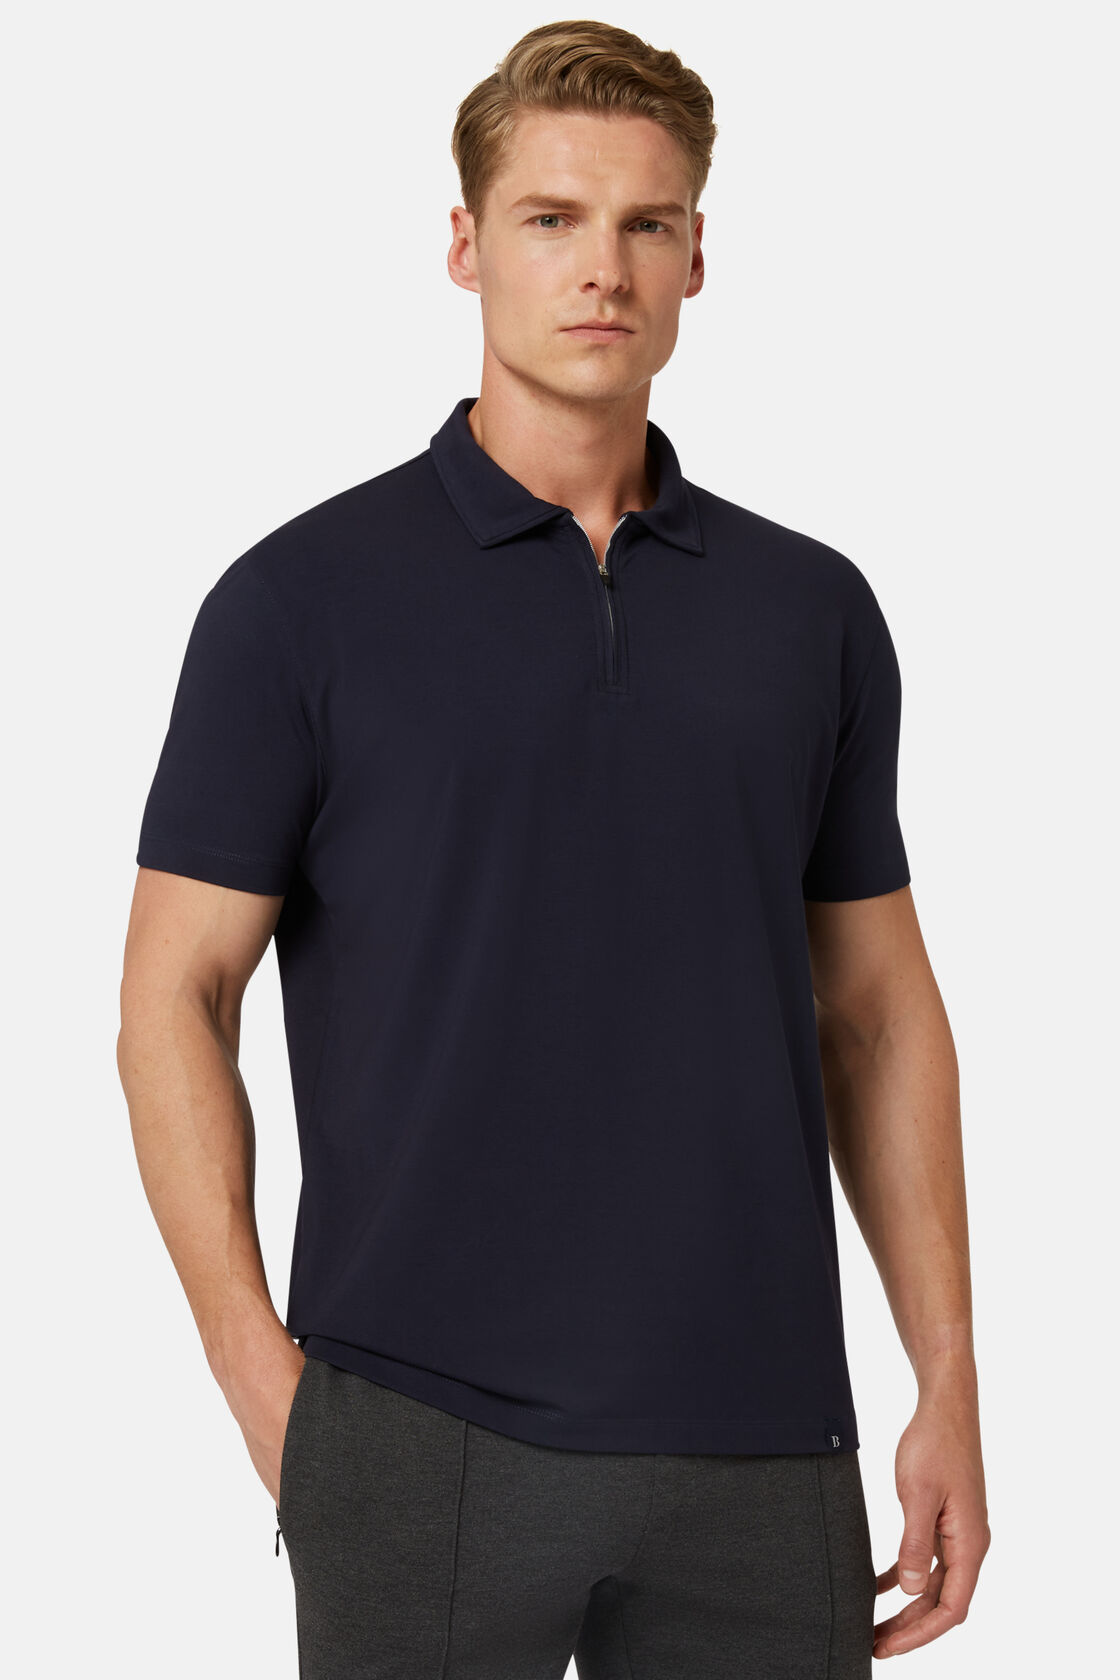 Polo Shirt In Stretch Supima Cotton Regular, Navy blue, hi-res